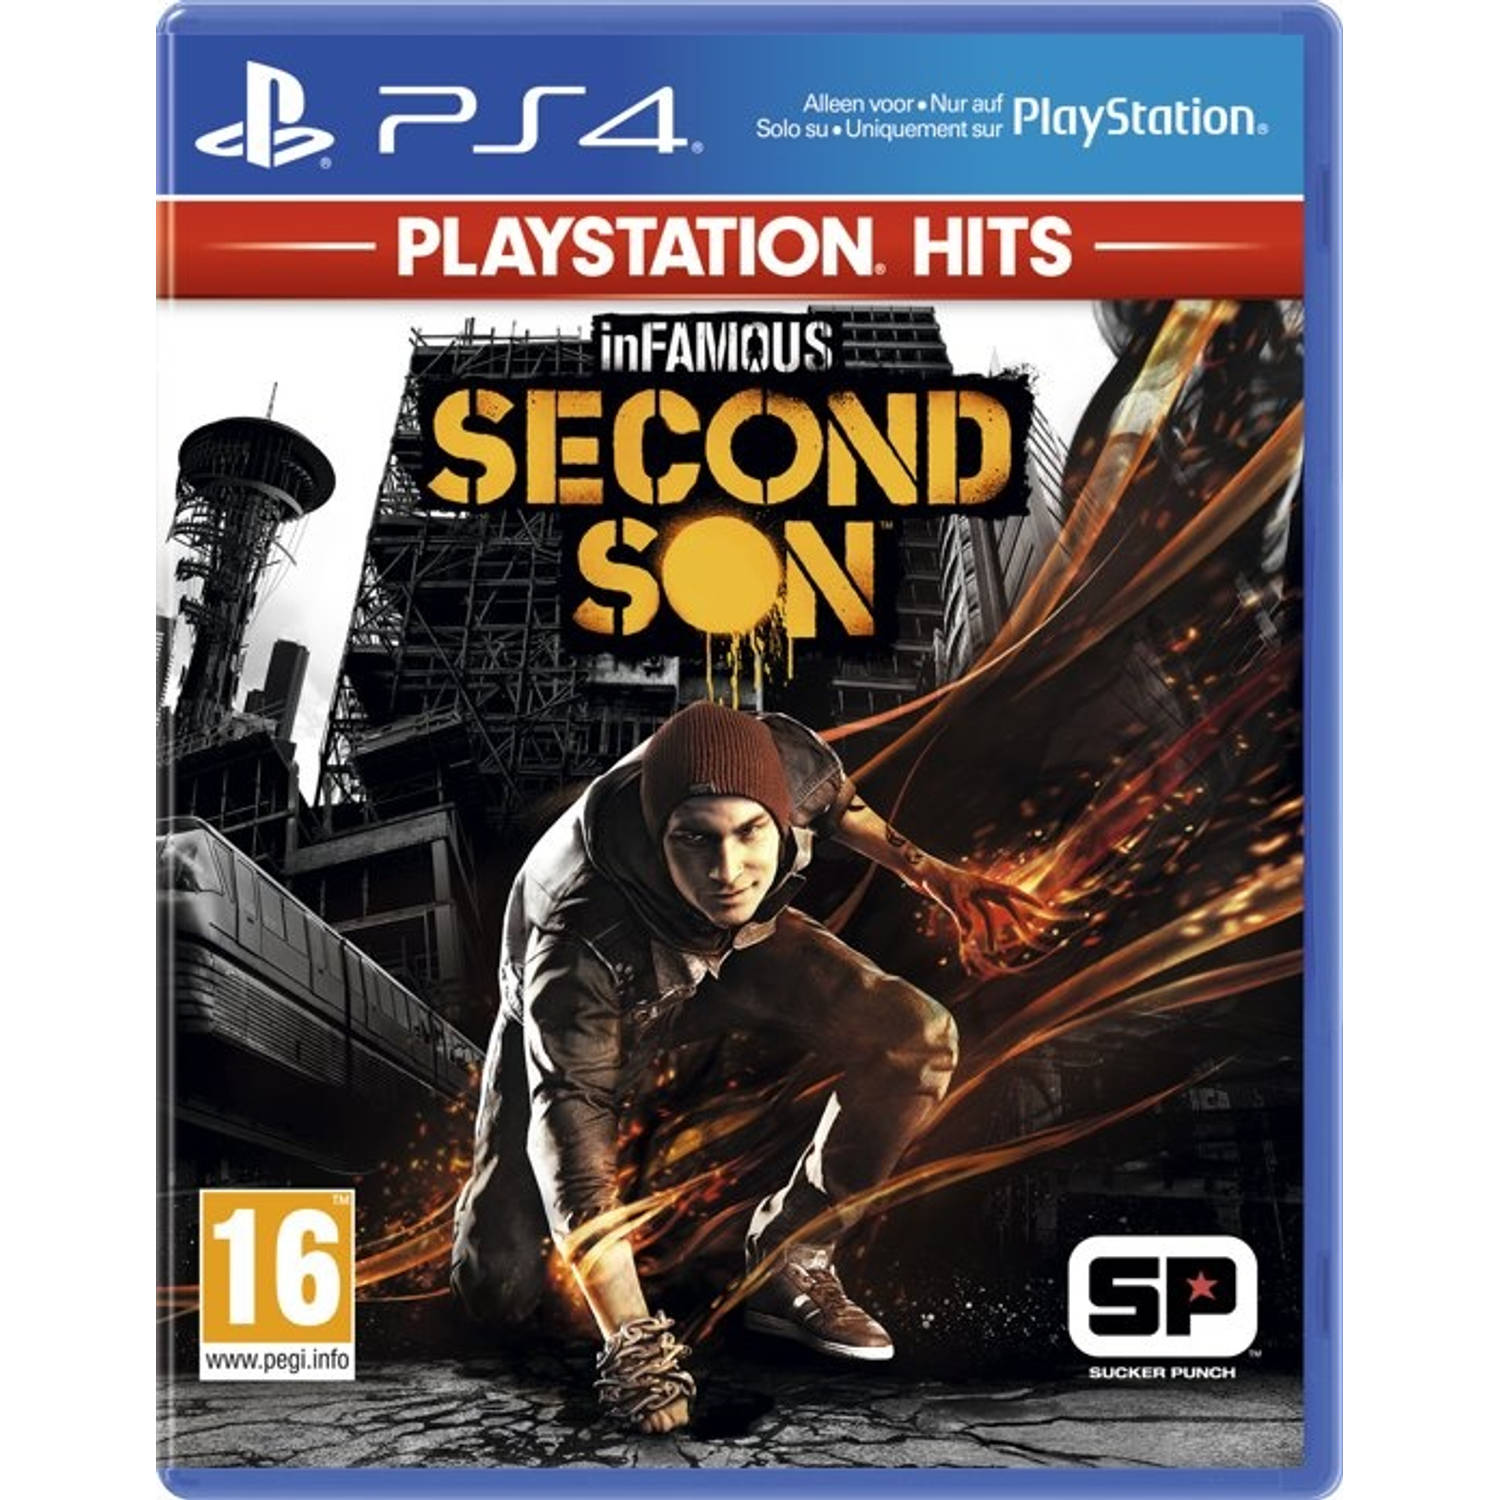 InFamous Second Son PlayStations Hits